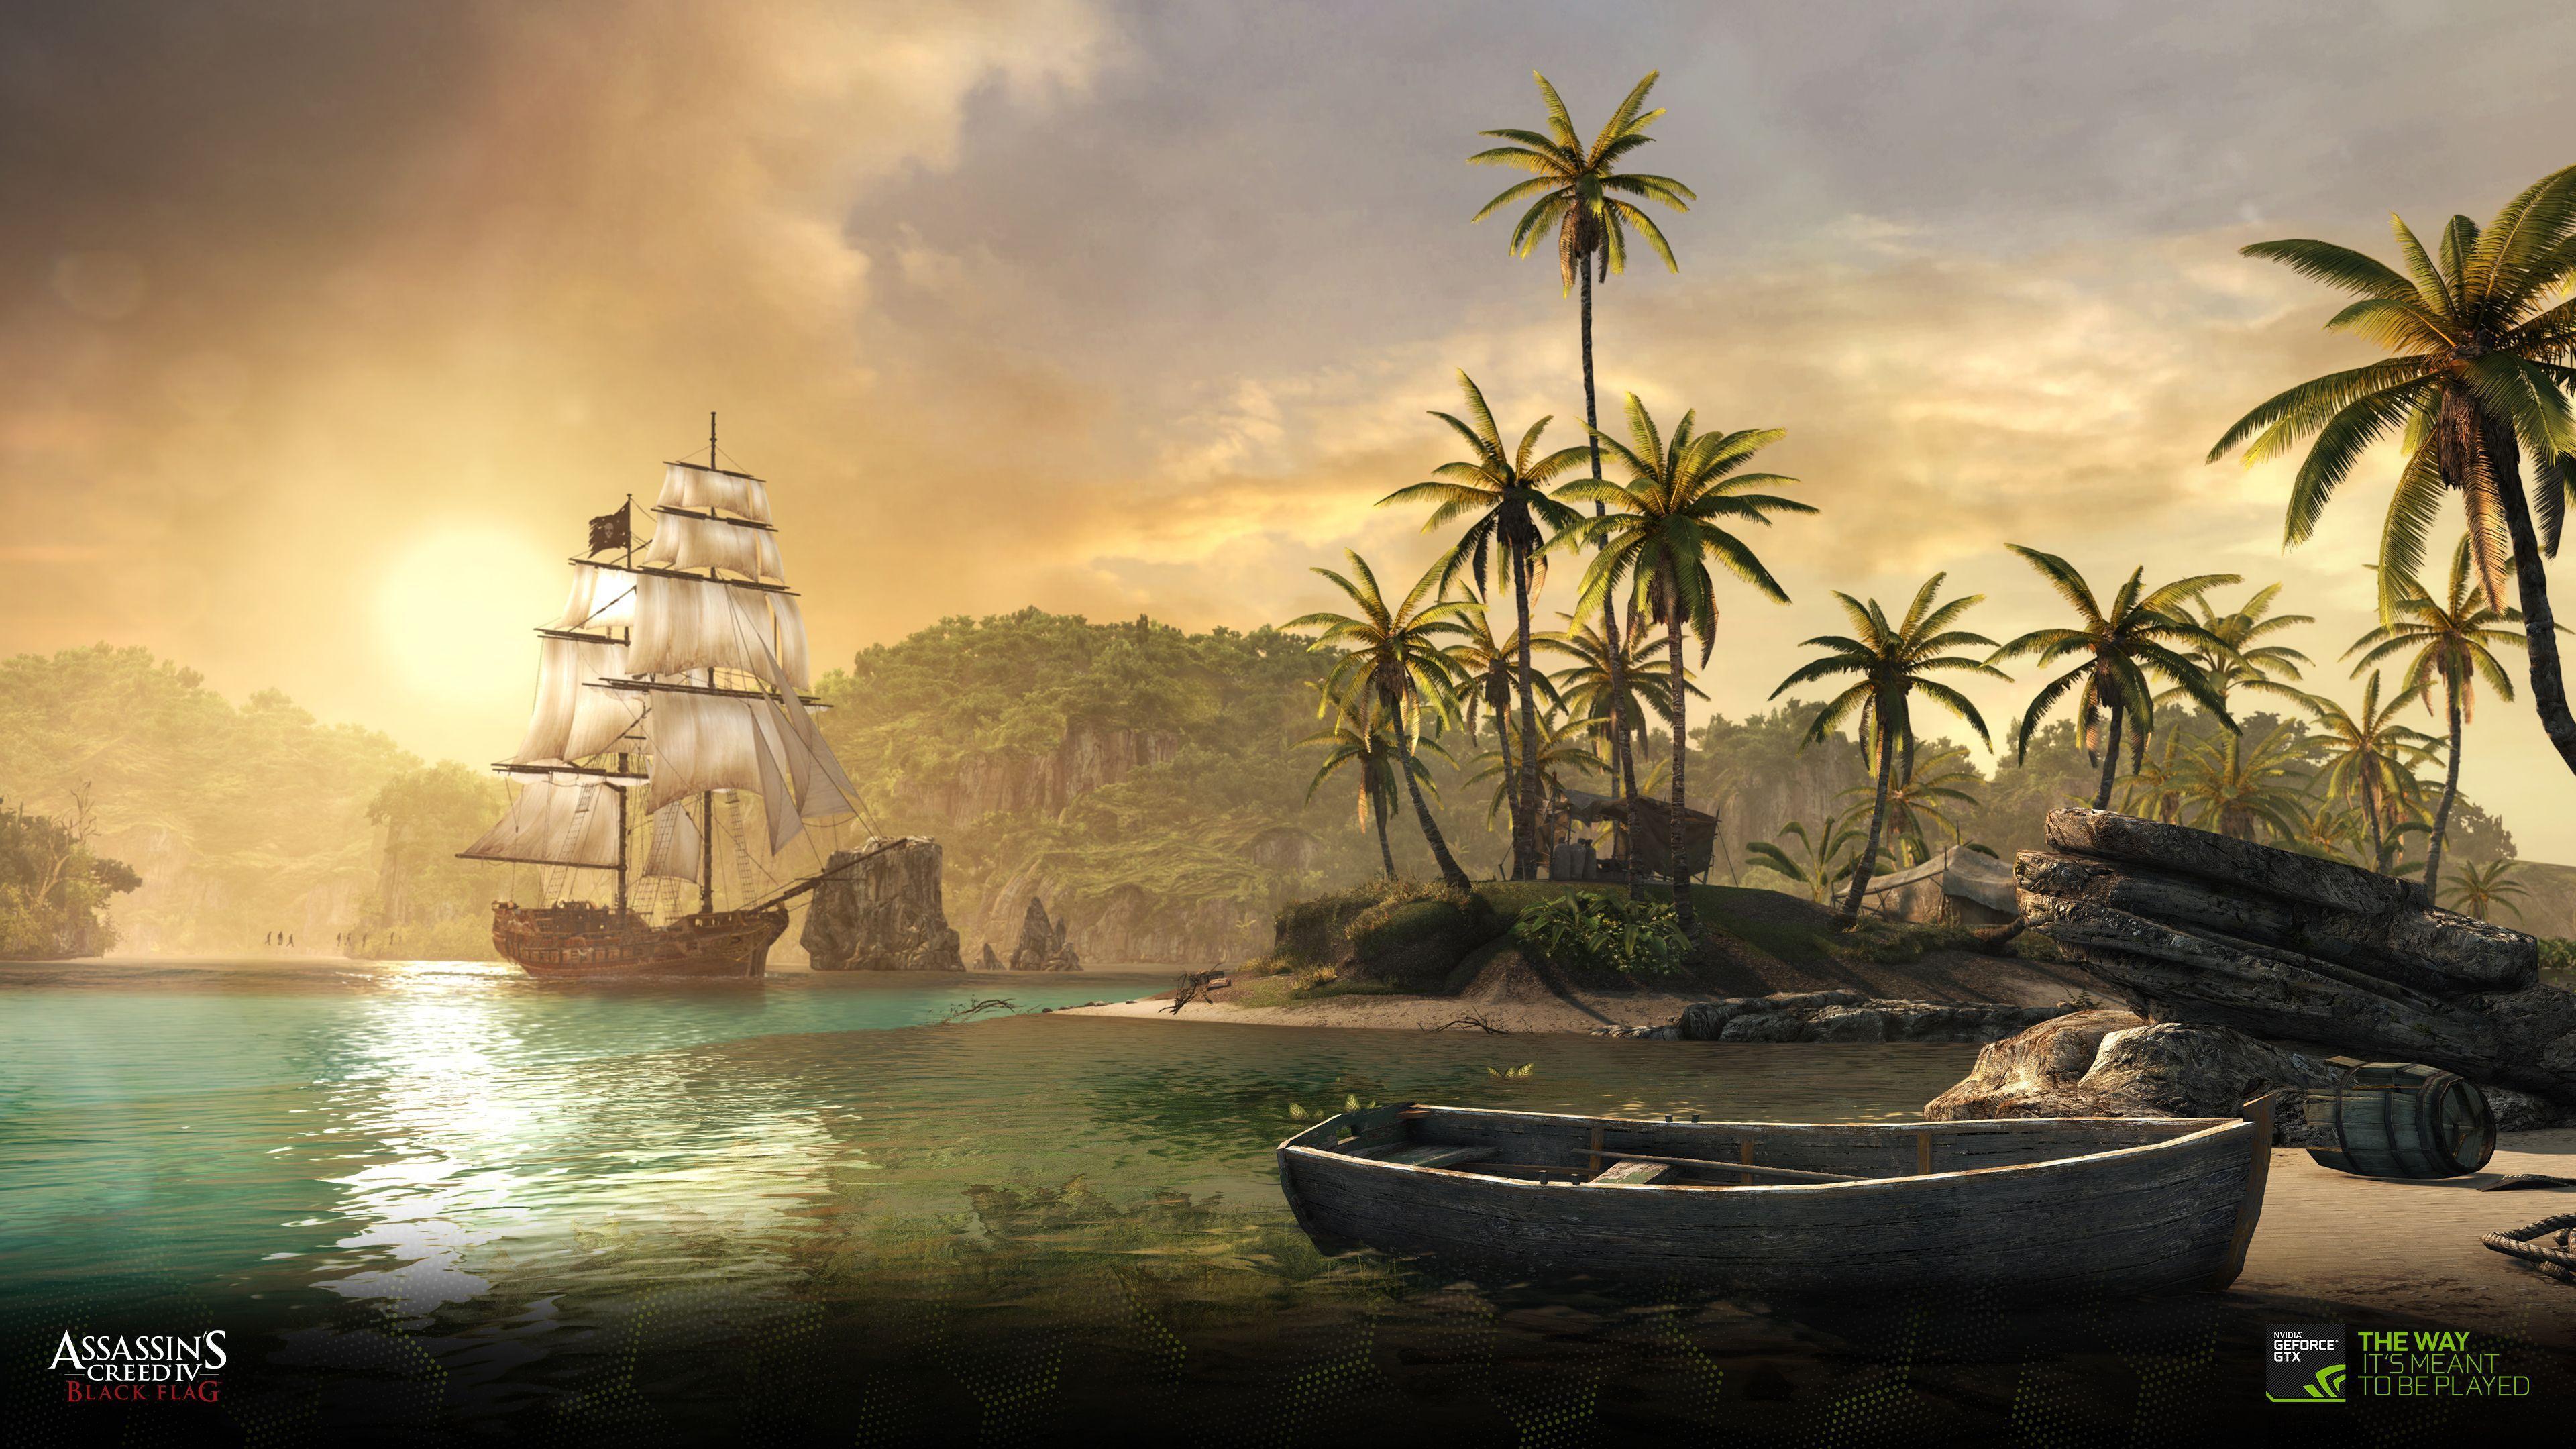 Download The Assassin's Creed IV Black Flag Wallpapers